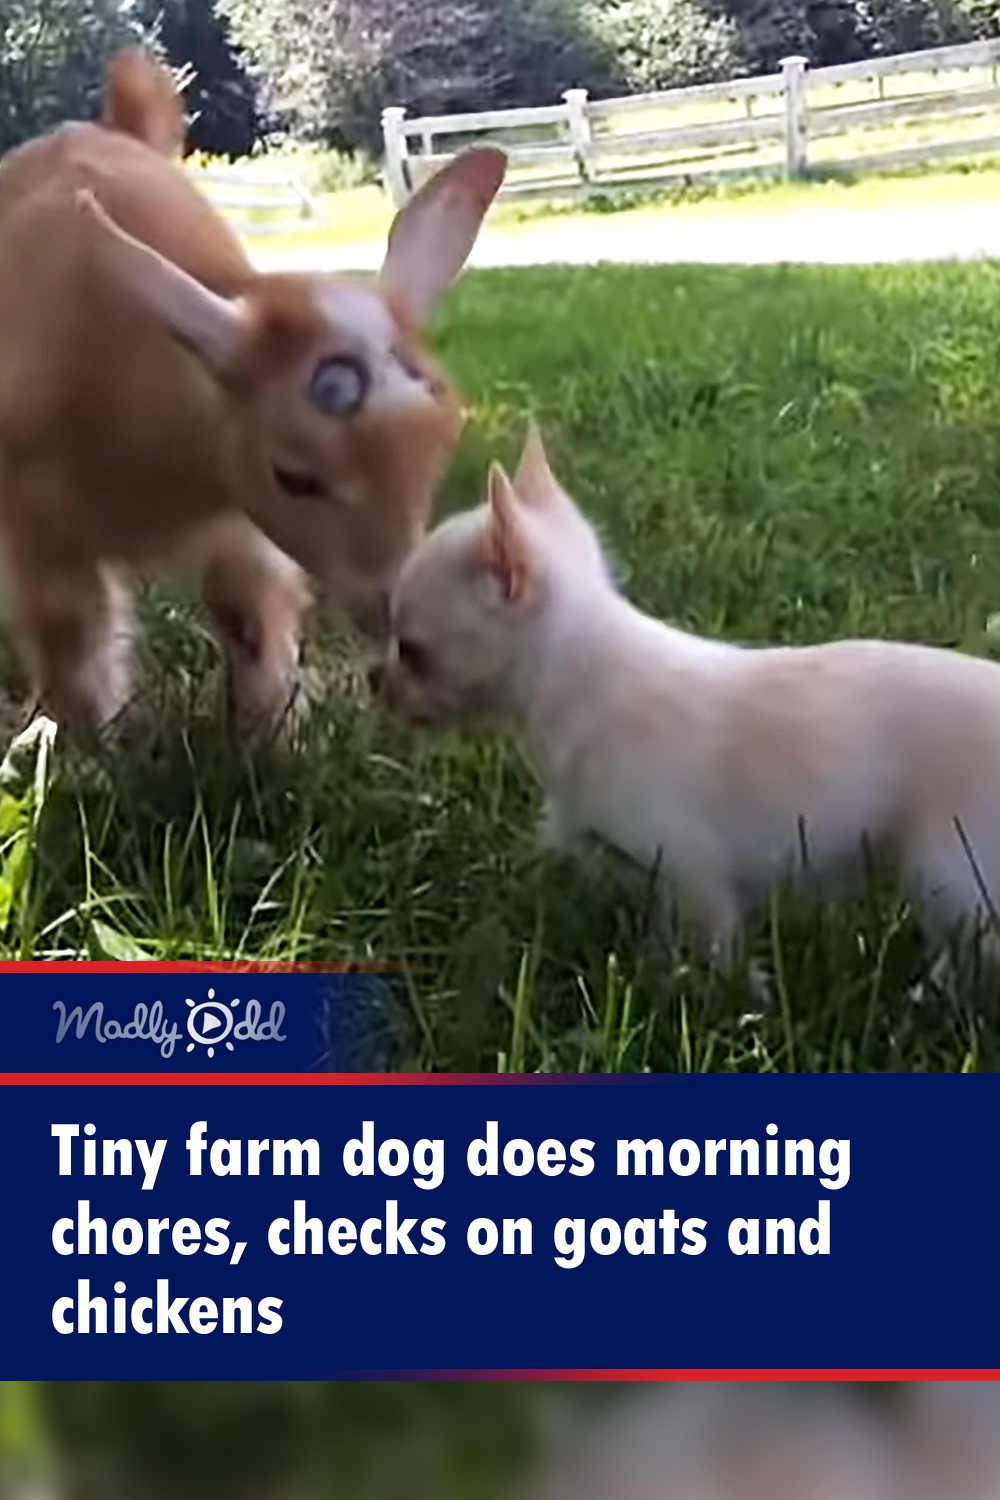 Tiny farm dog does morning chores, checks on goats and chickens